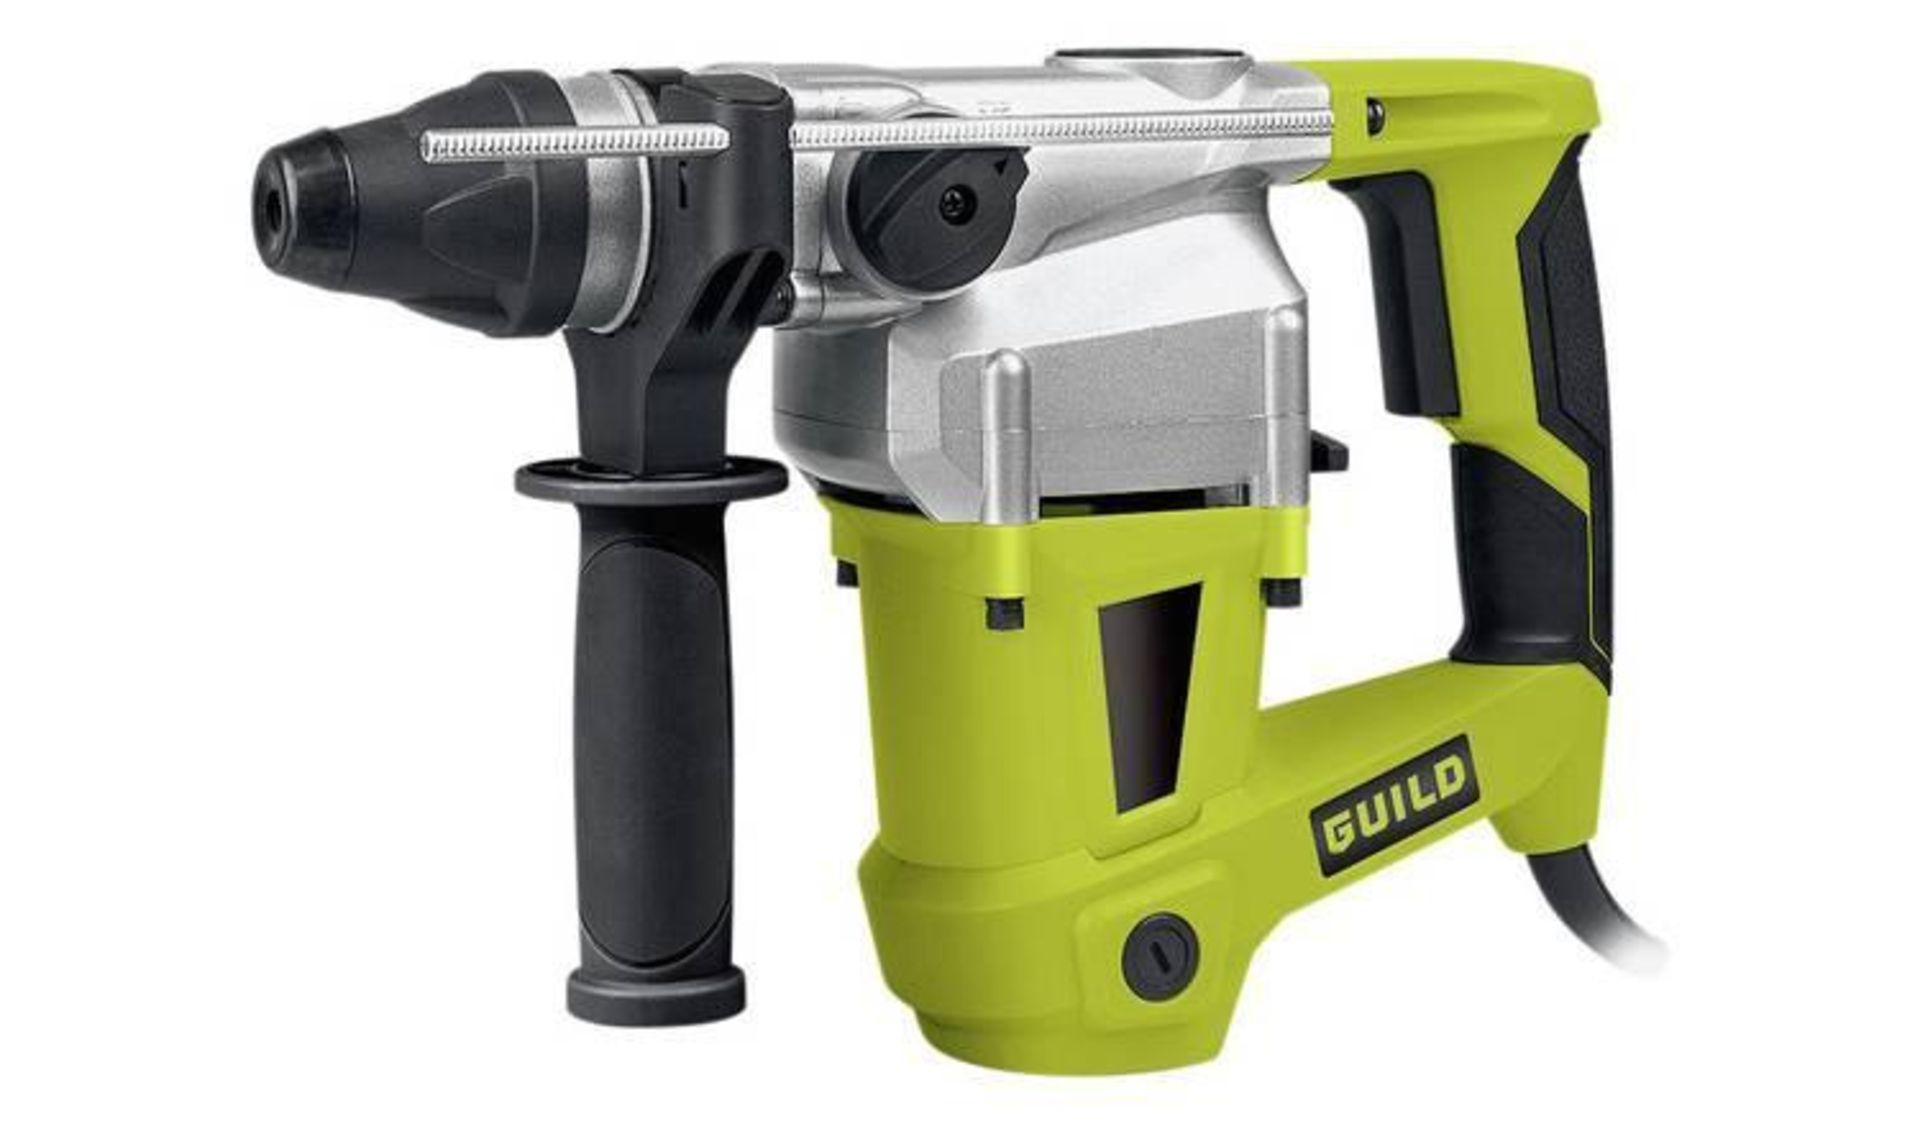 Guild Corded SDS Rotary Hammer Drill - 1000W PDH26G 453/3102 - £50.00 RRP